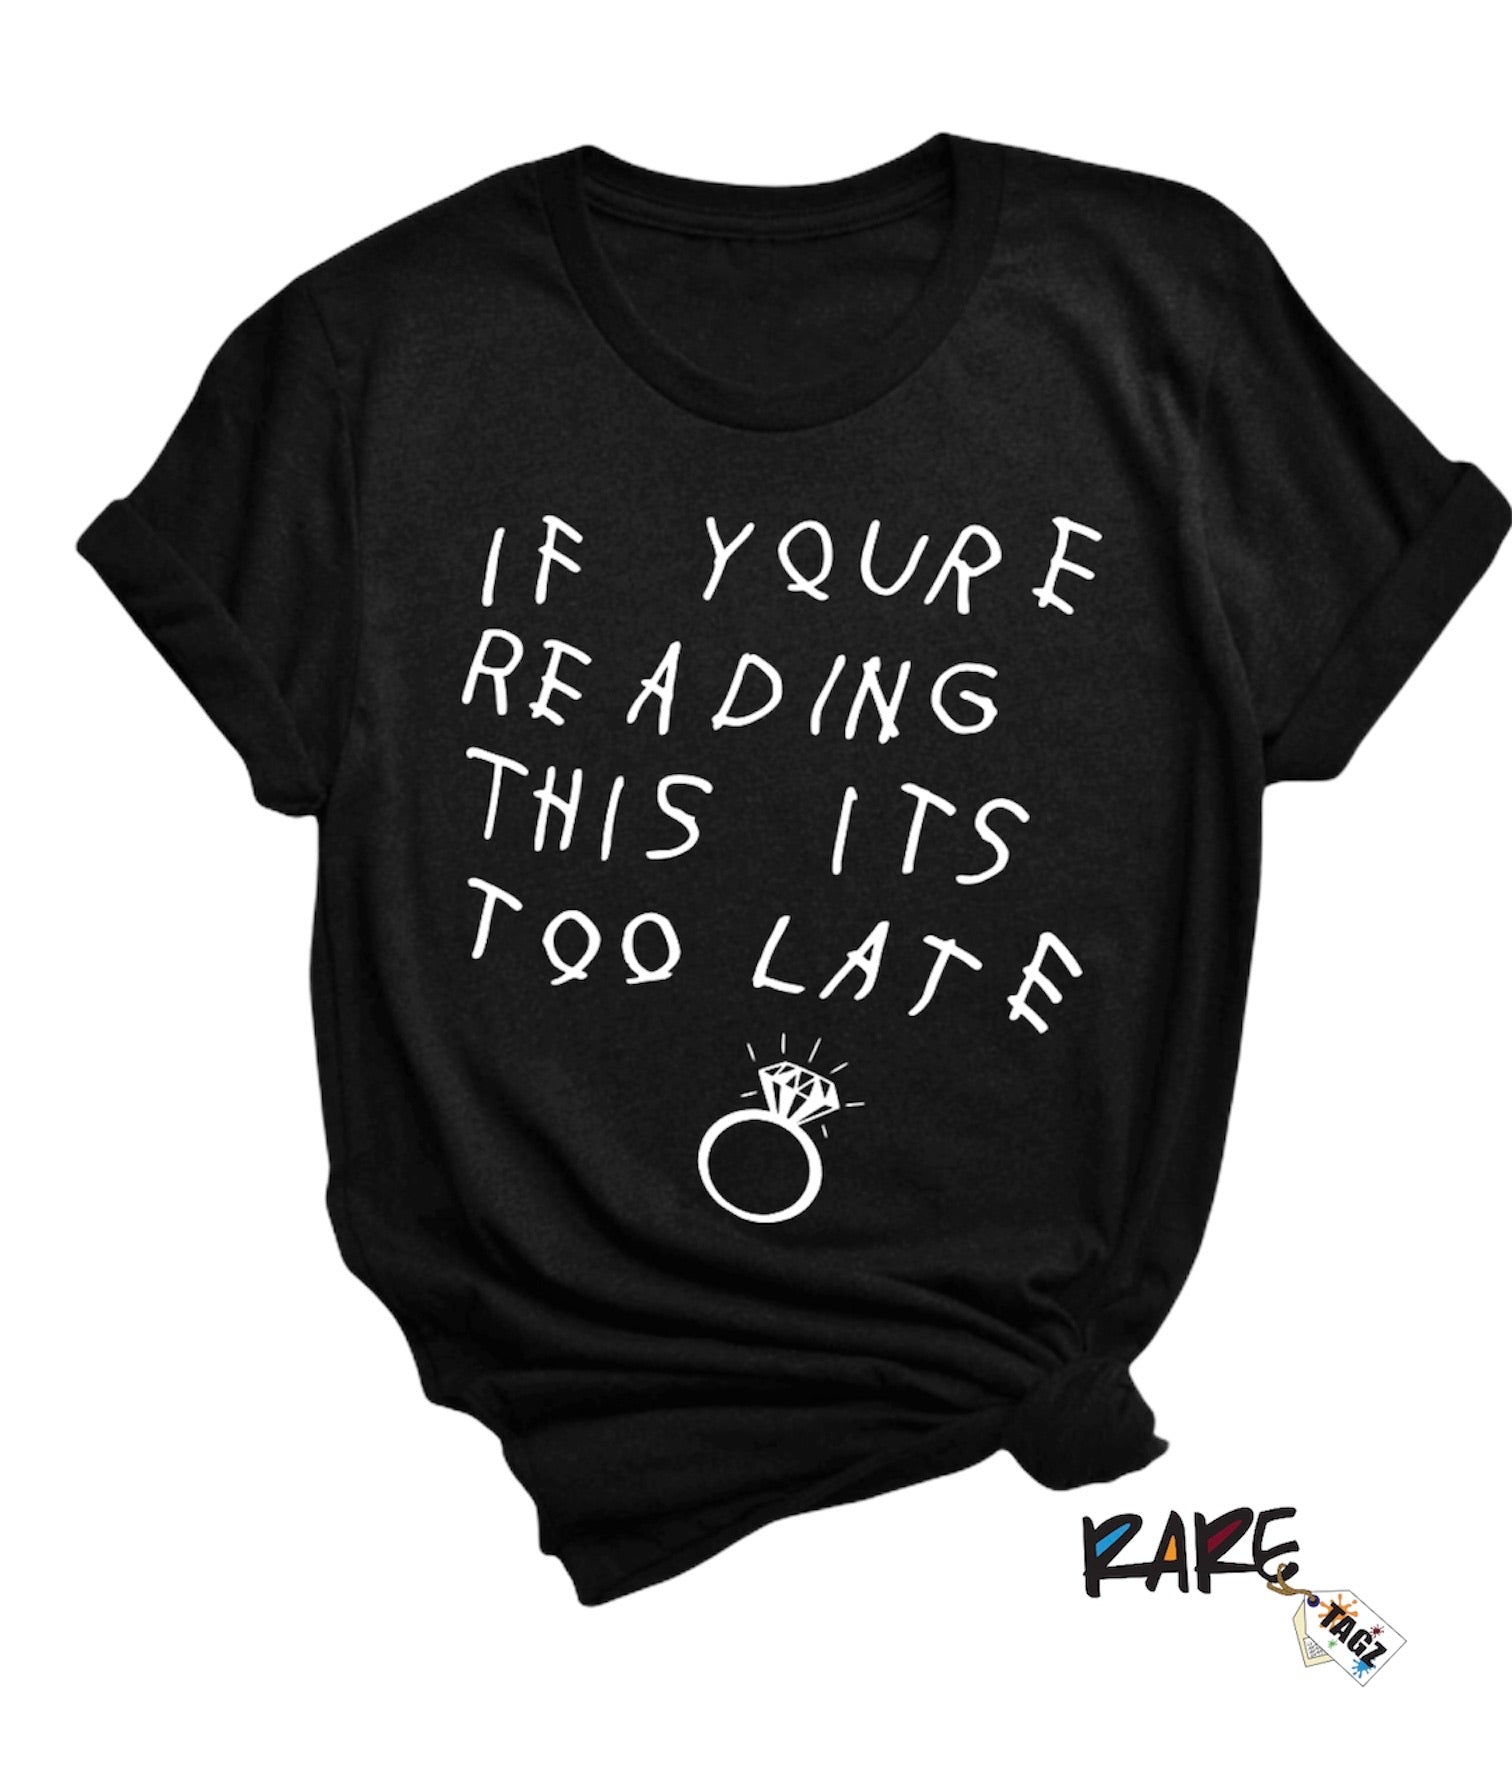 "IF YOURE READING THIS ITS TOO LATE" Tee